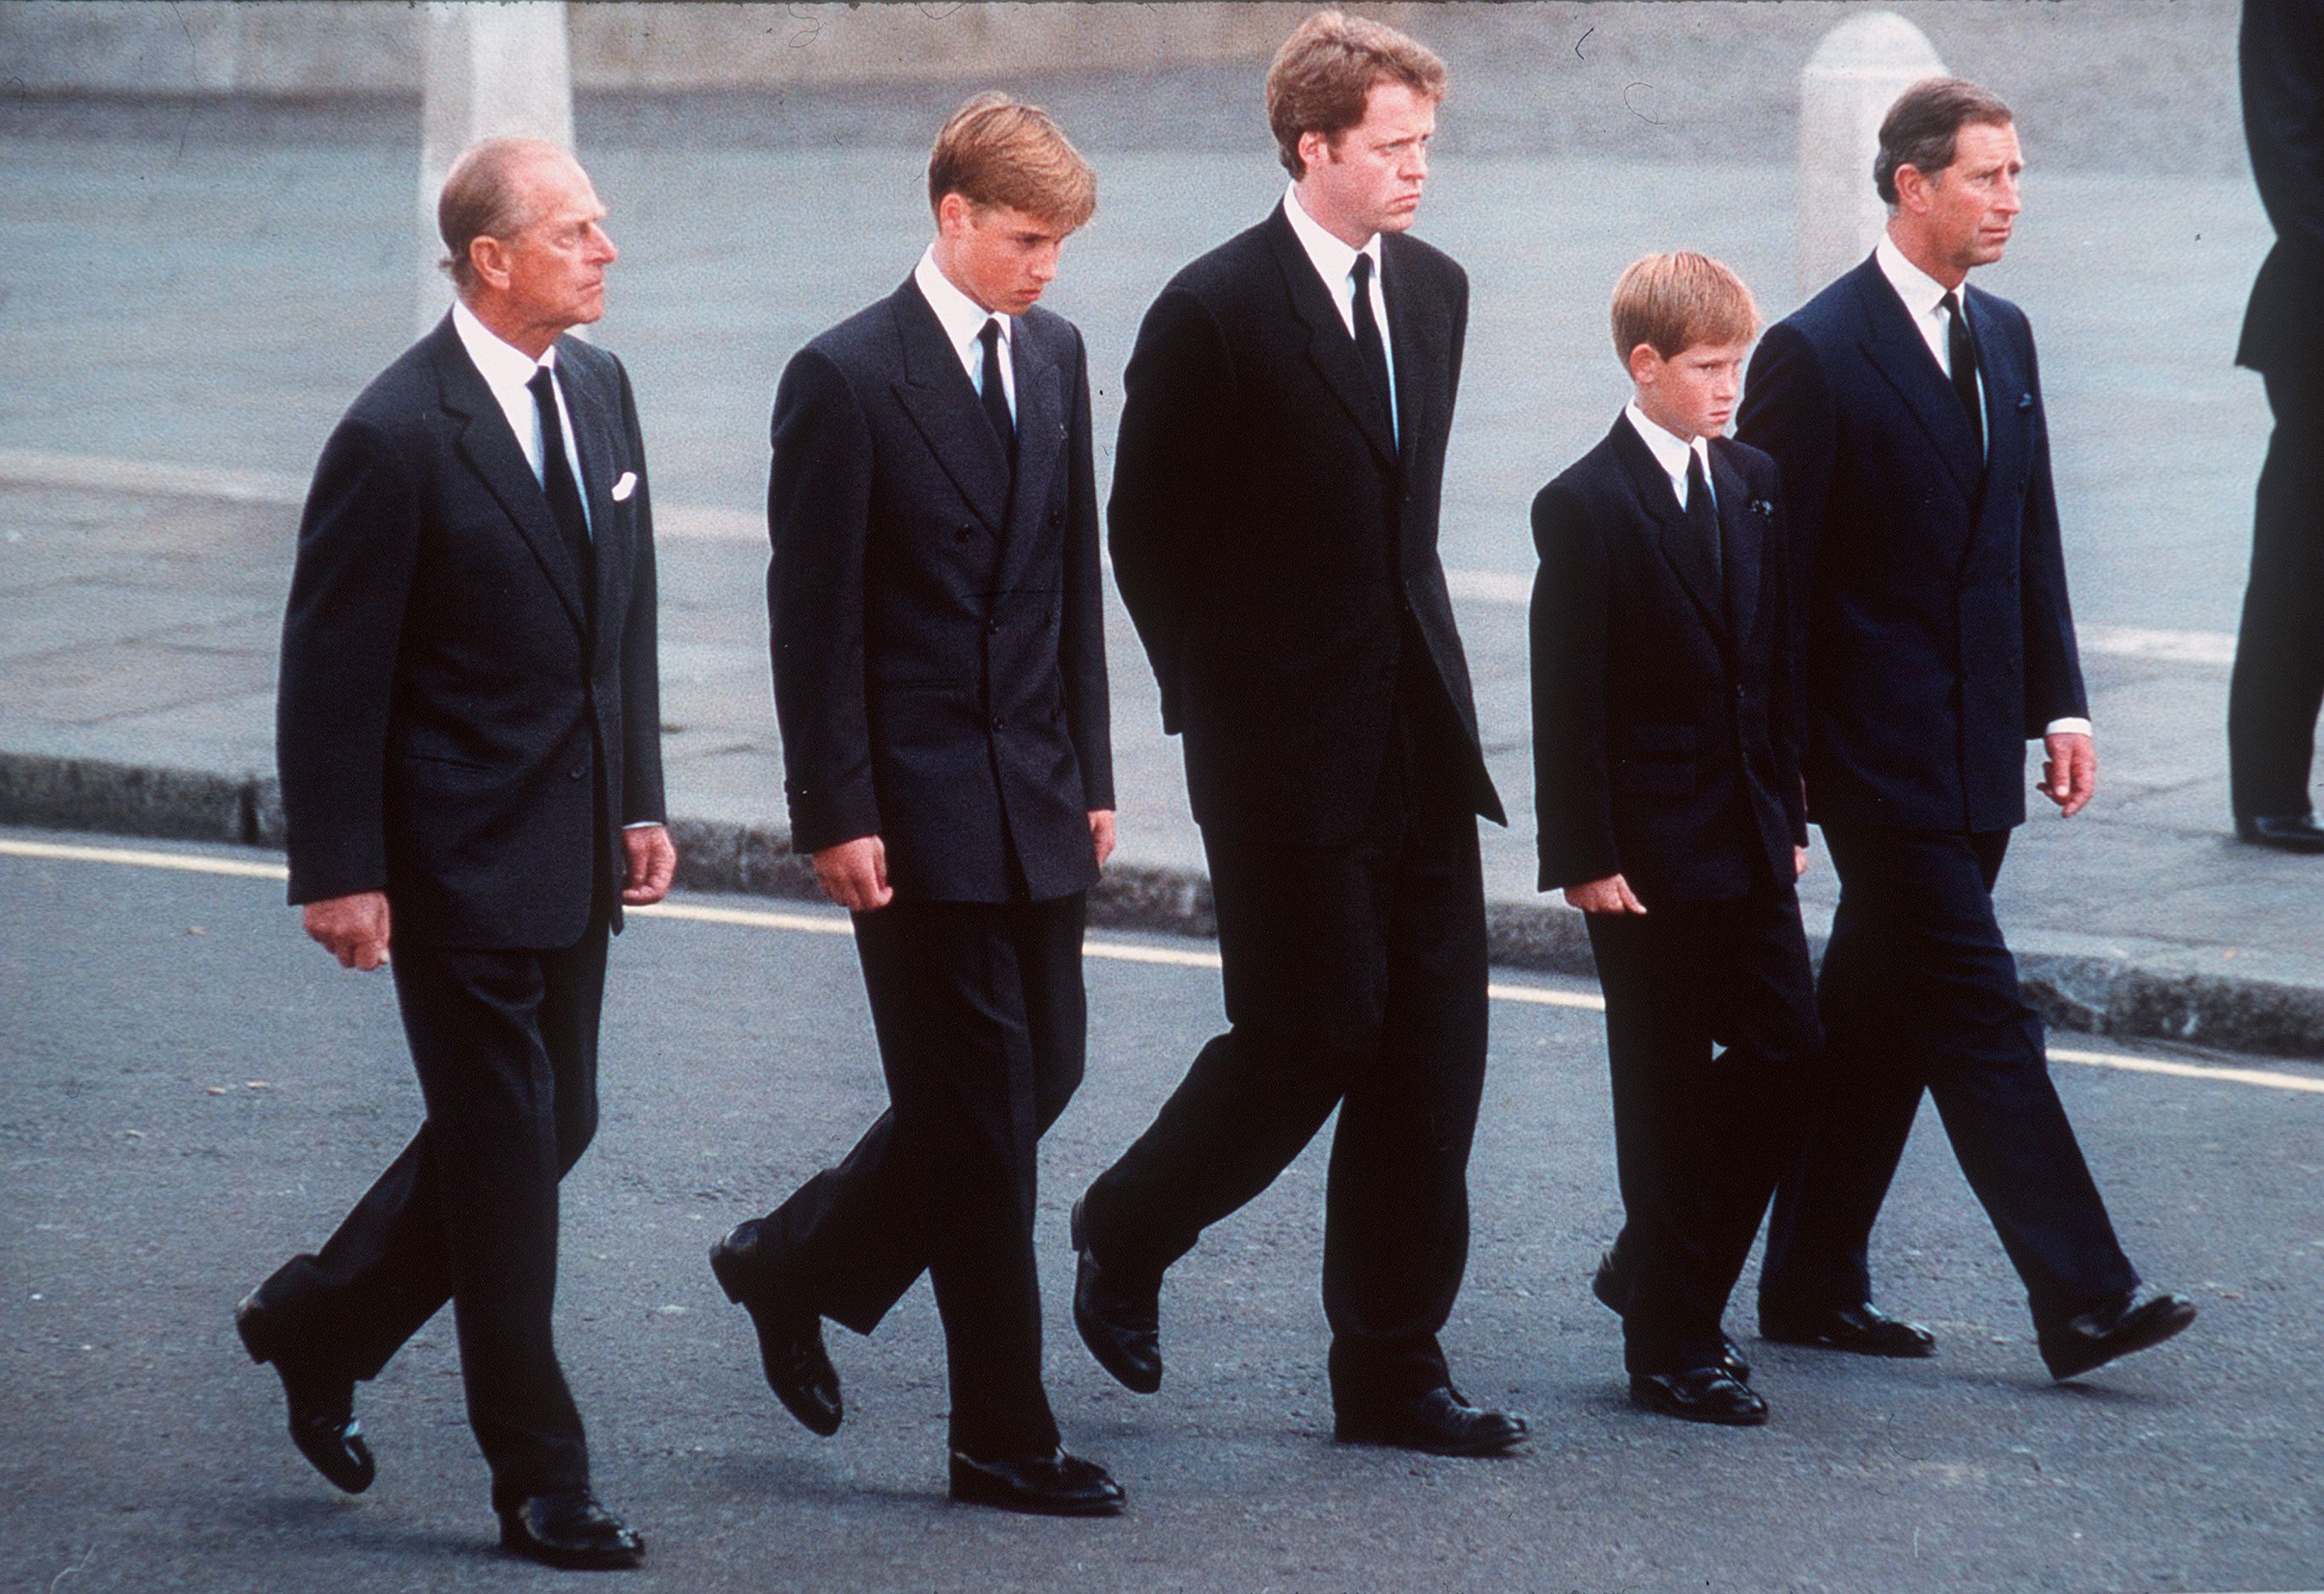 Late Prince Philip, Prince William, Earl Spencer, Prince Harry and Prince Charles, followed the coffin of late Princess Diana, in London, England on September 6, 1997 | Photo: Getty Images